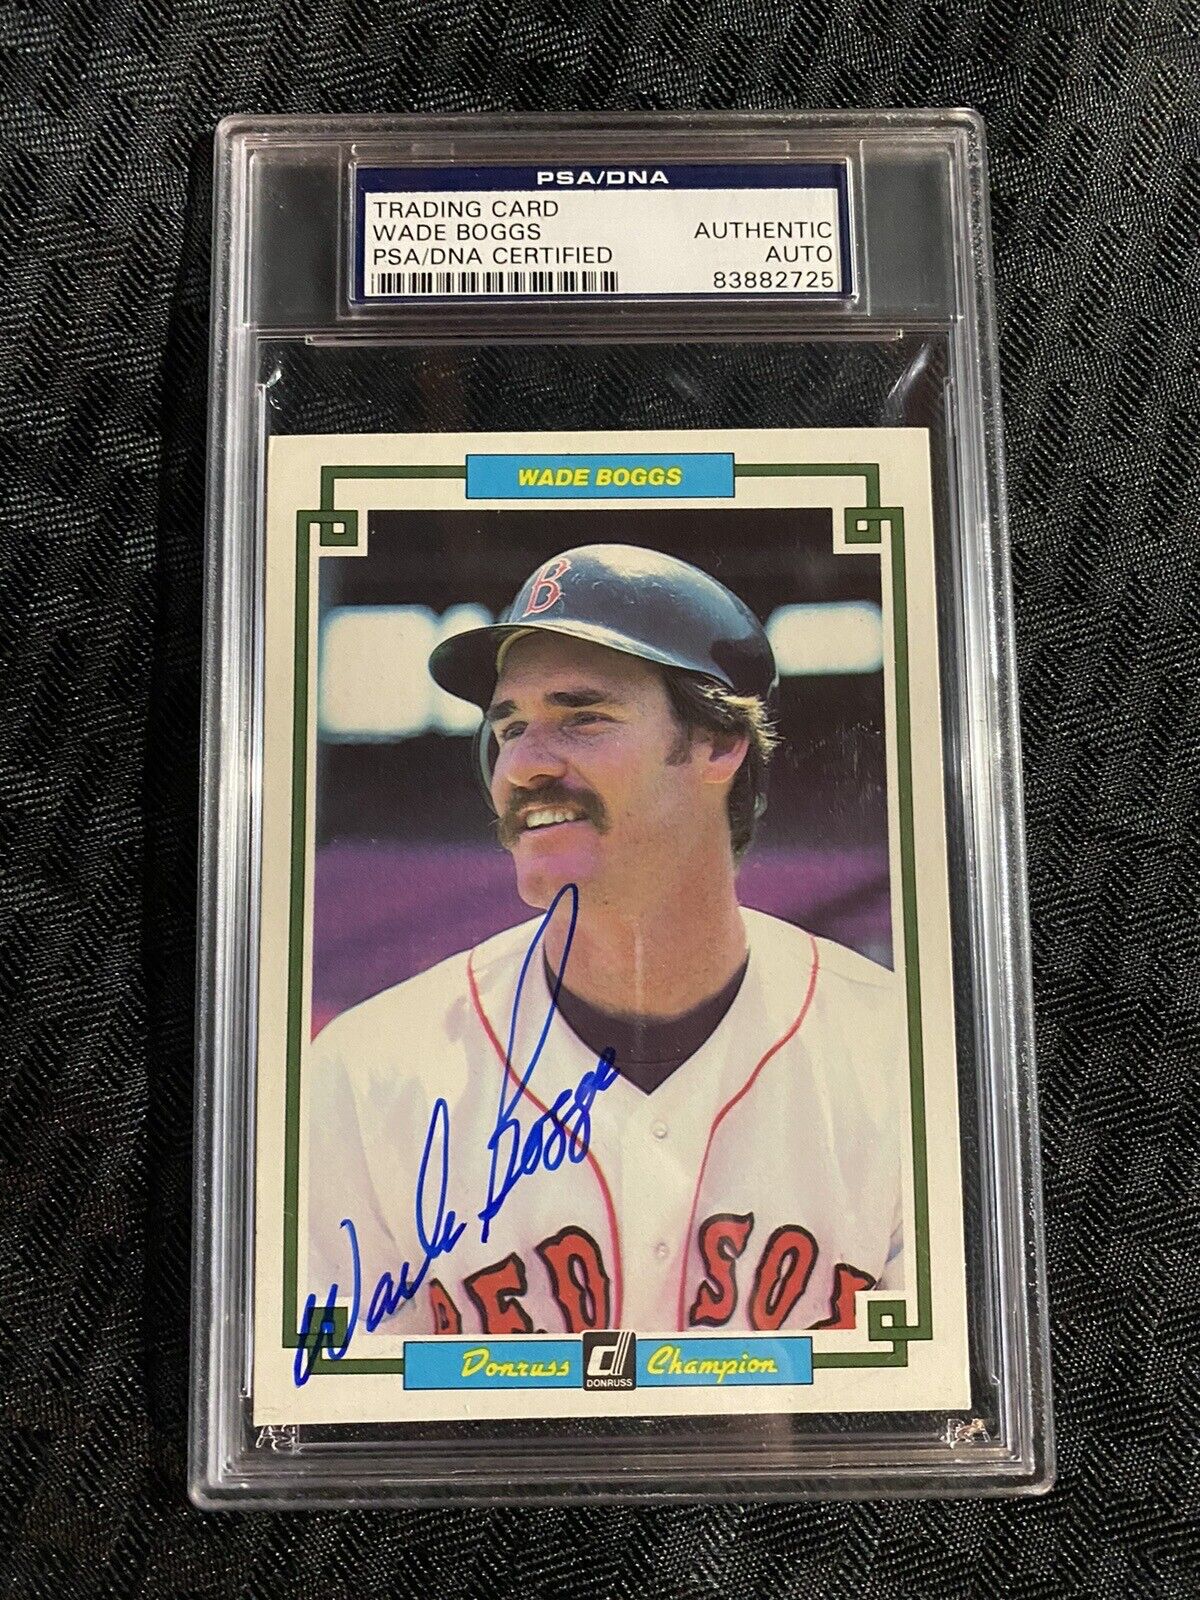 1984 Donruss Champion Wade Boggs PSA DNA signed Auto 3X5 Card